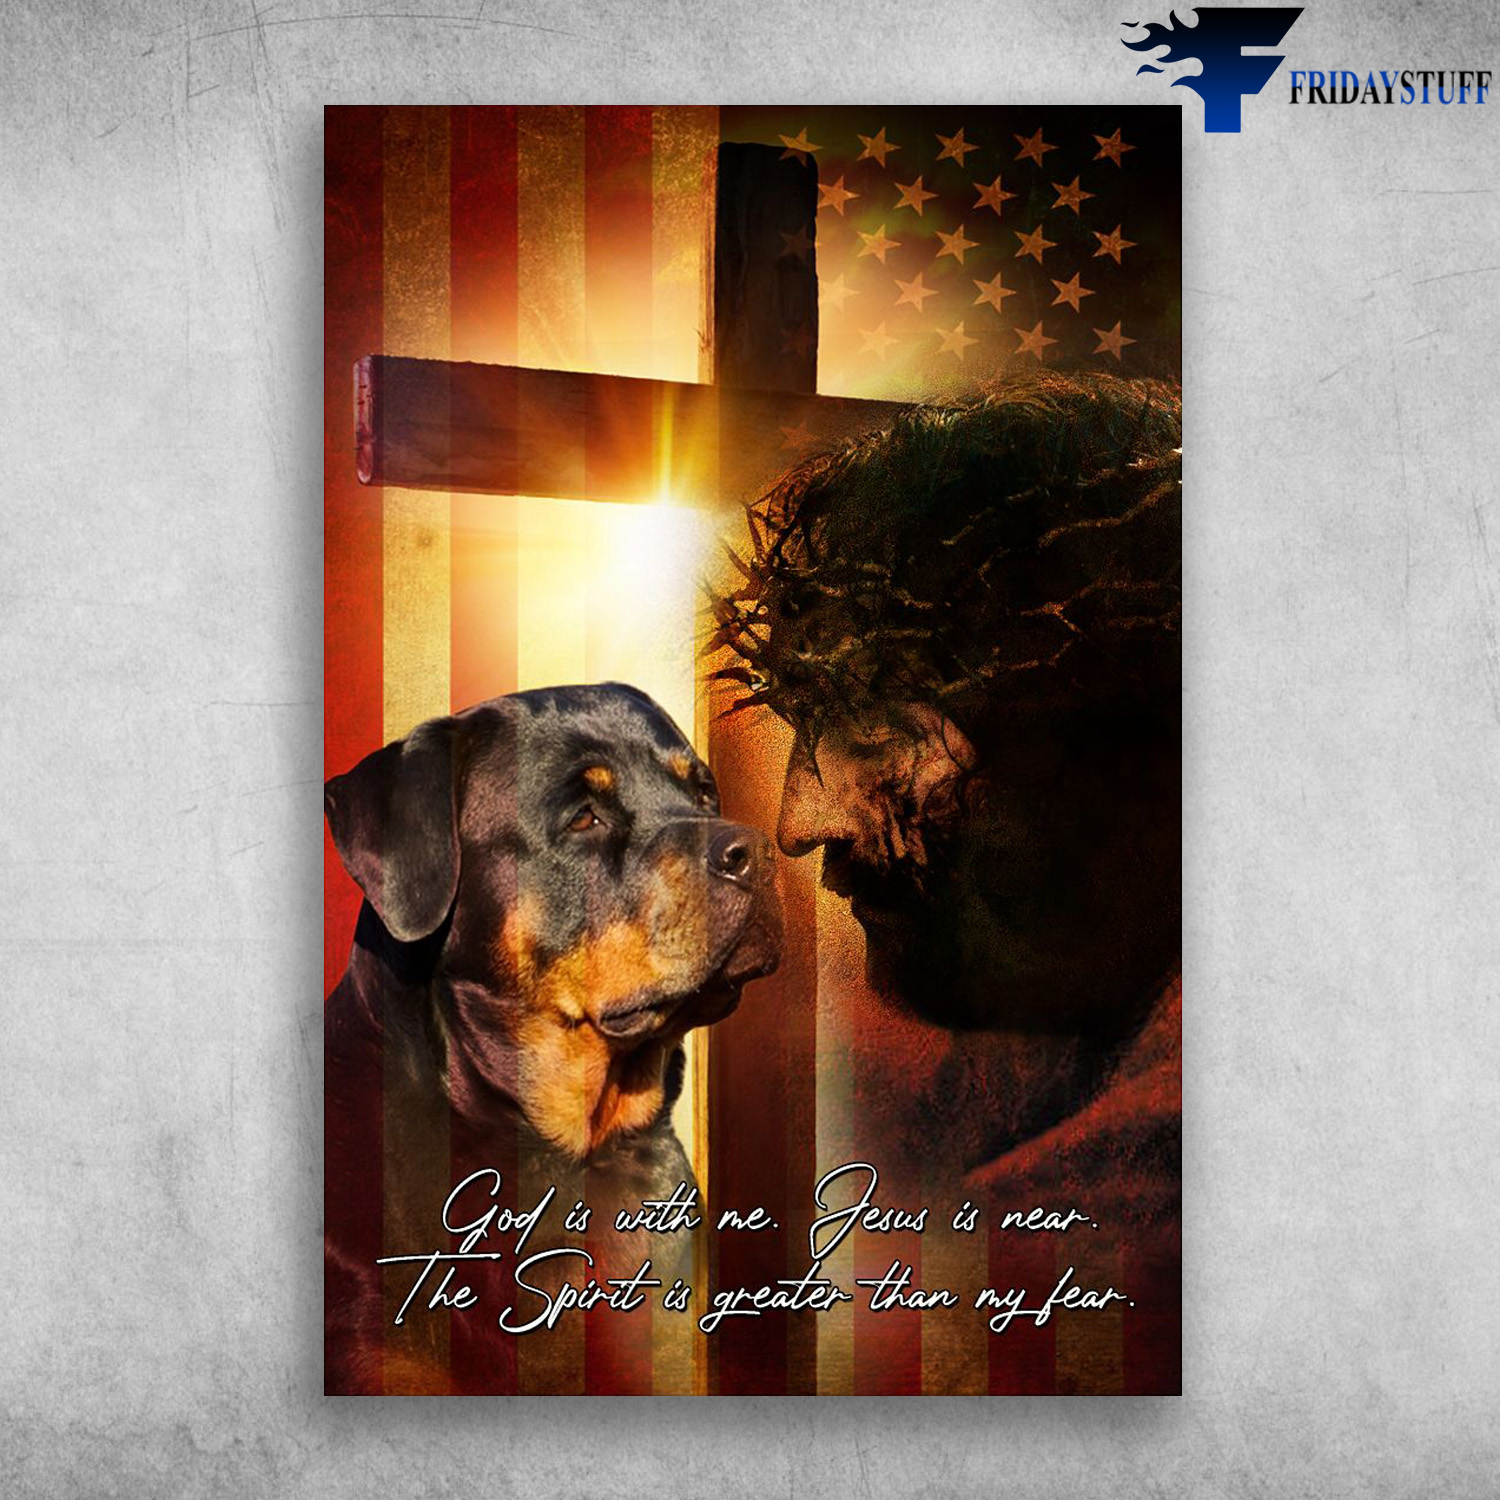 Rottweiler Dog And God - God Is With Nem Jesus Is Near, The Spirit Greater Is Than Fear, The Cross